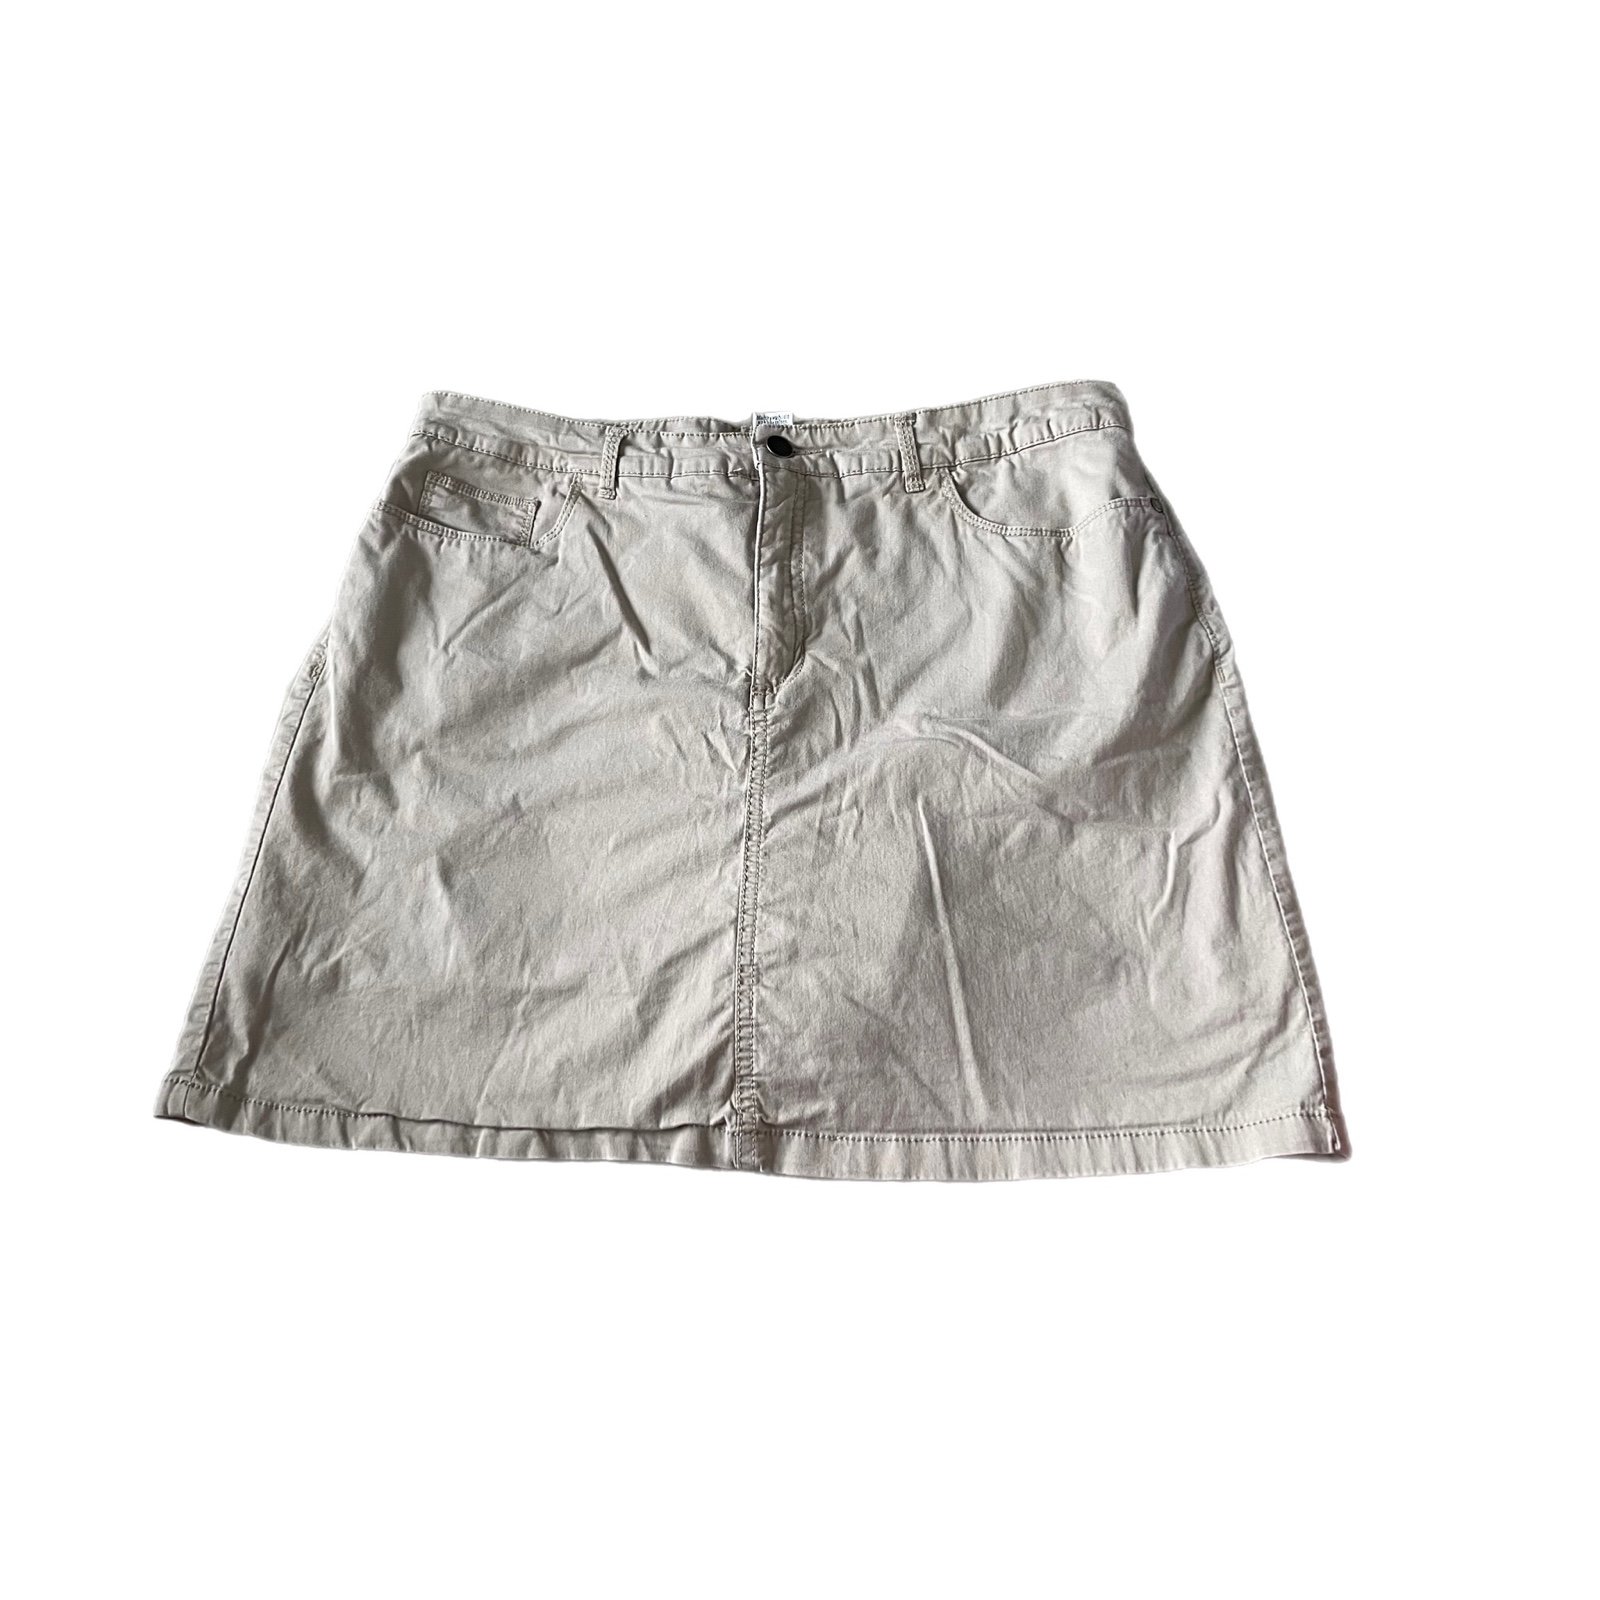 Discounted Croft & Barrow khaki classic fit skort size 12 oXQNwMJZ1 Outlet Store